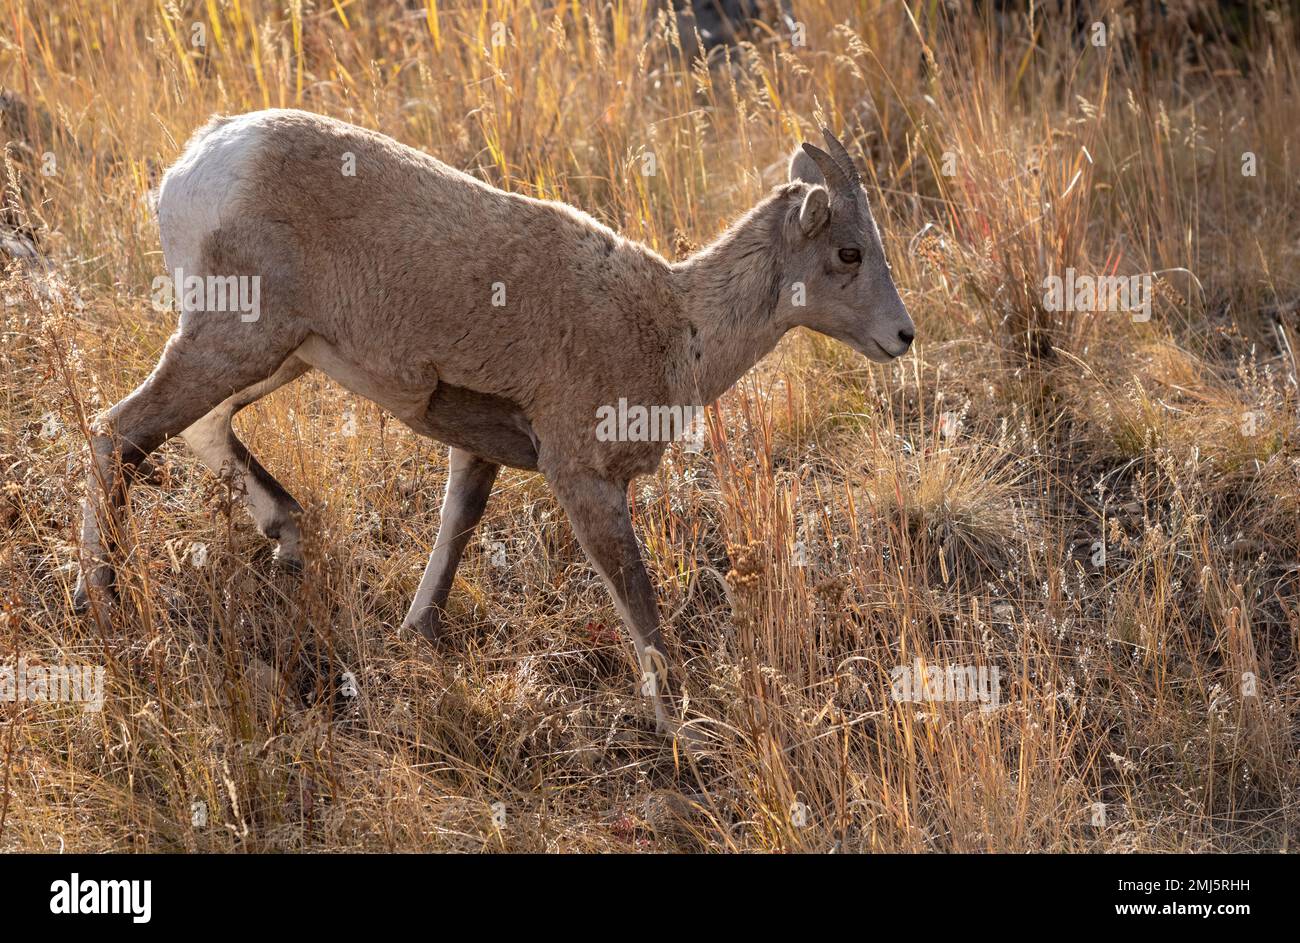 A young bighorn sheep in Yellowstone National Park. Stock Photo